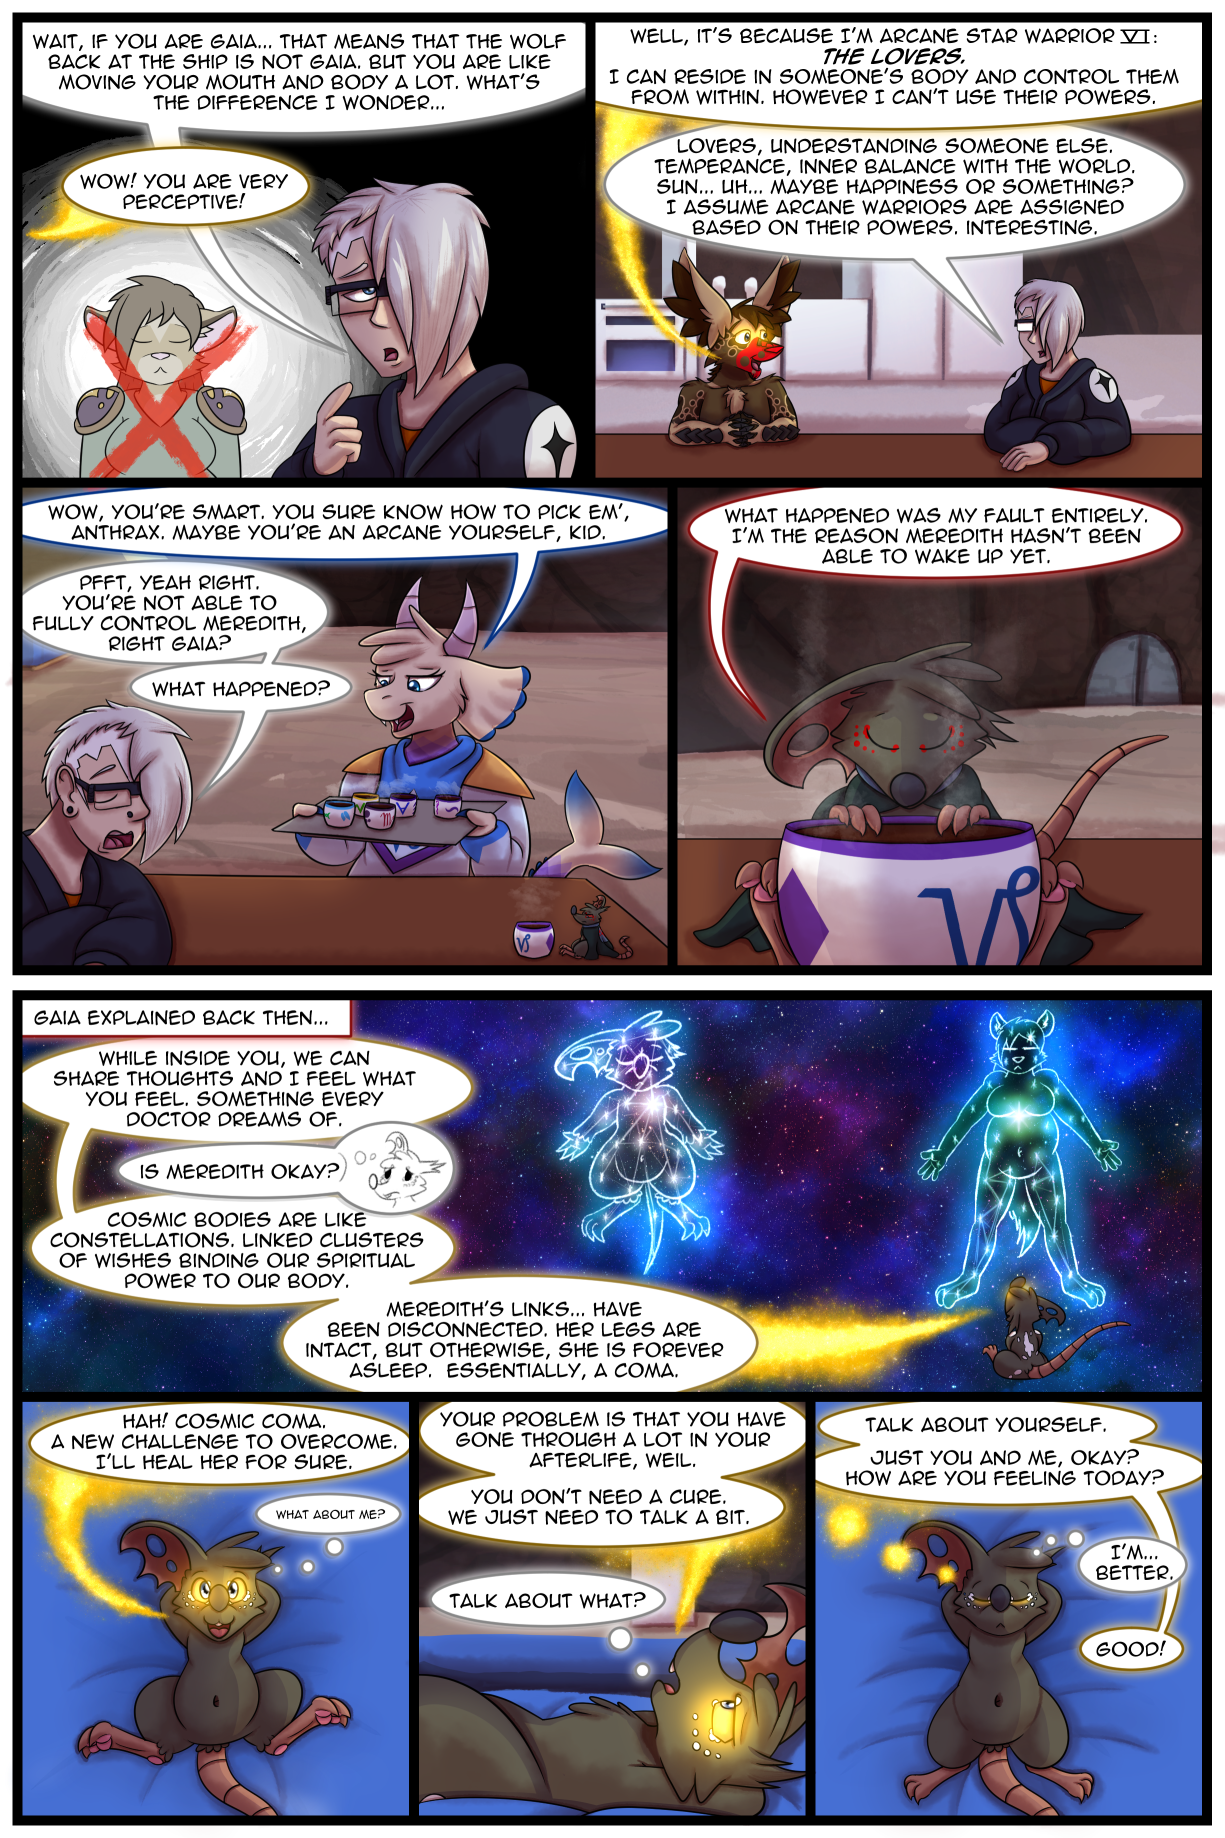 Ch5 Page 37 – Healing